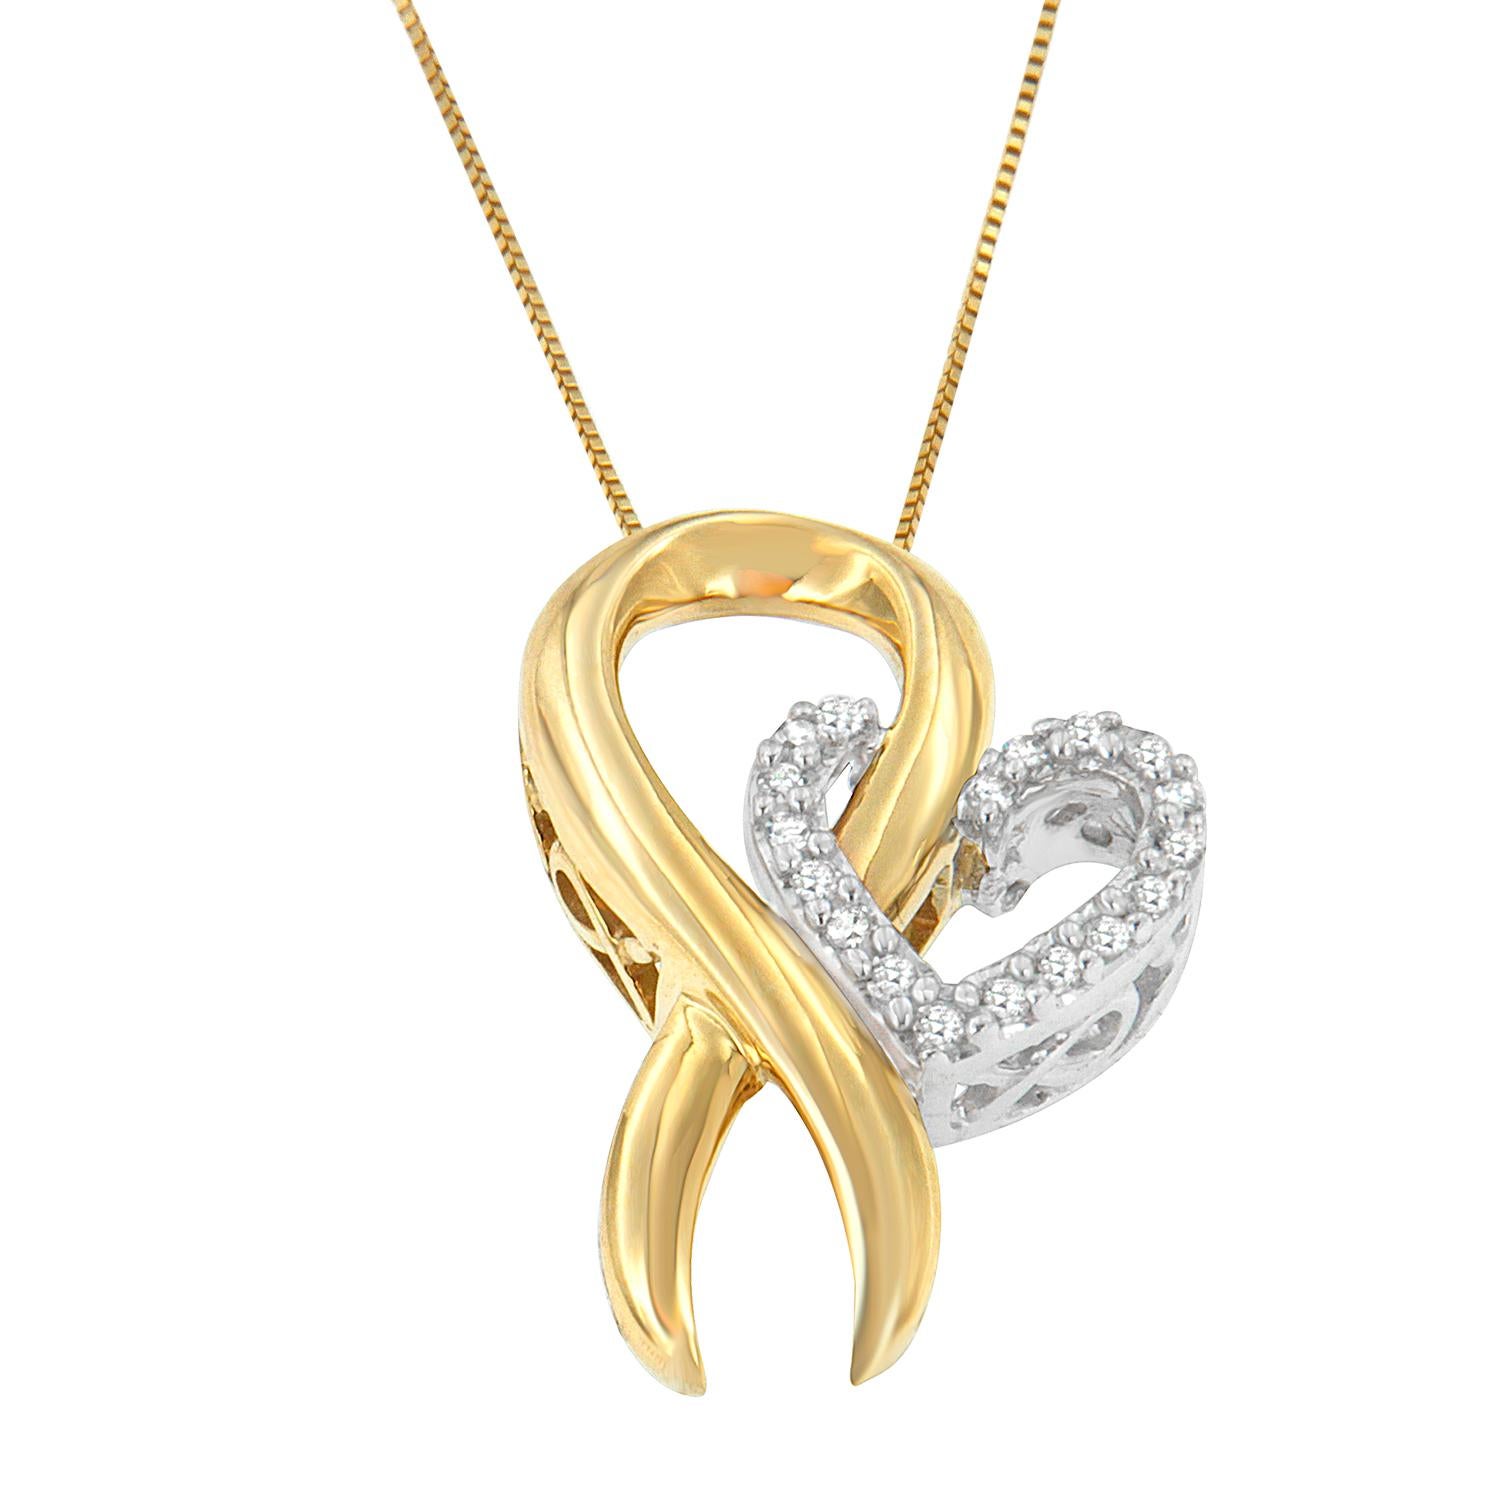 Let everyone in the party wow with this wonderful pendant. Featuring an interesting combination of heart and ribbon, this pendant is crafted of sterling silver and ten karats yellow gold. The lovely heart accent is embellished with 1/10 karats